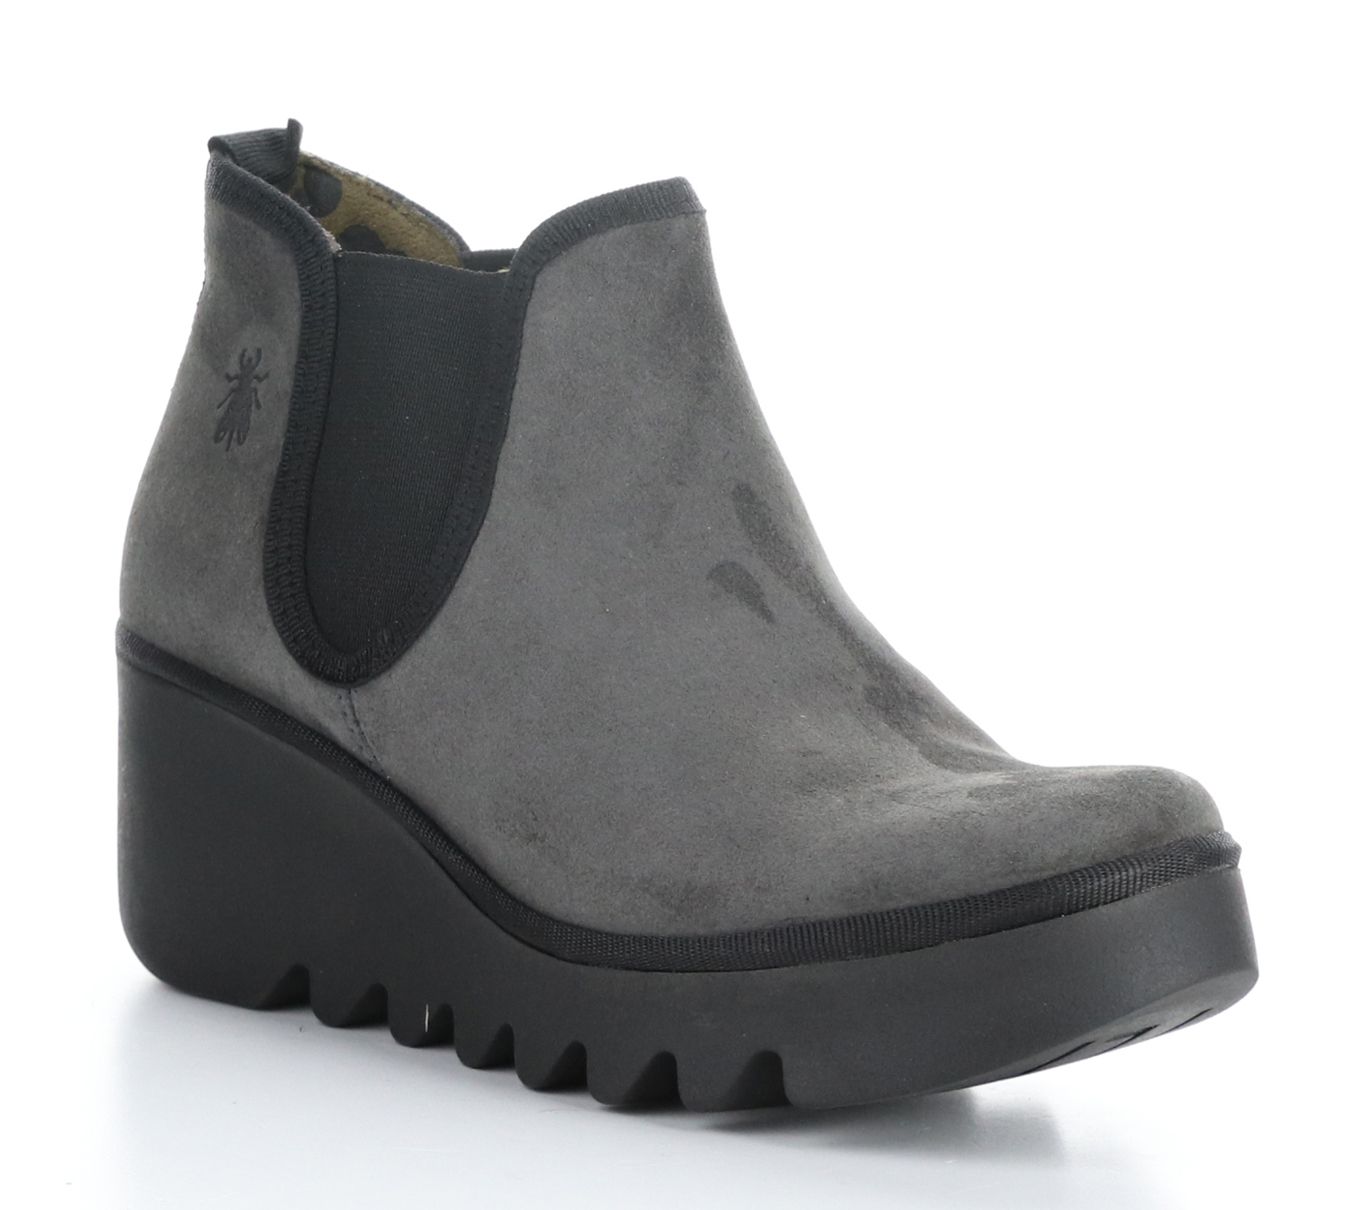 Fly London Suede Wedge Boots - Byne - QVC.com